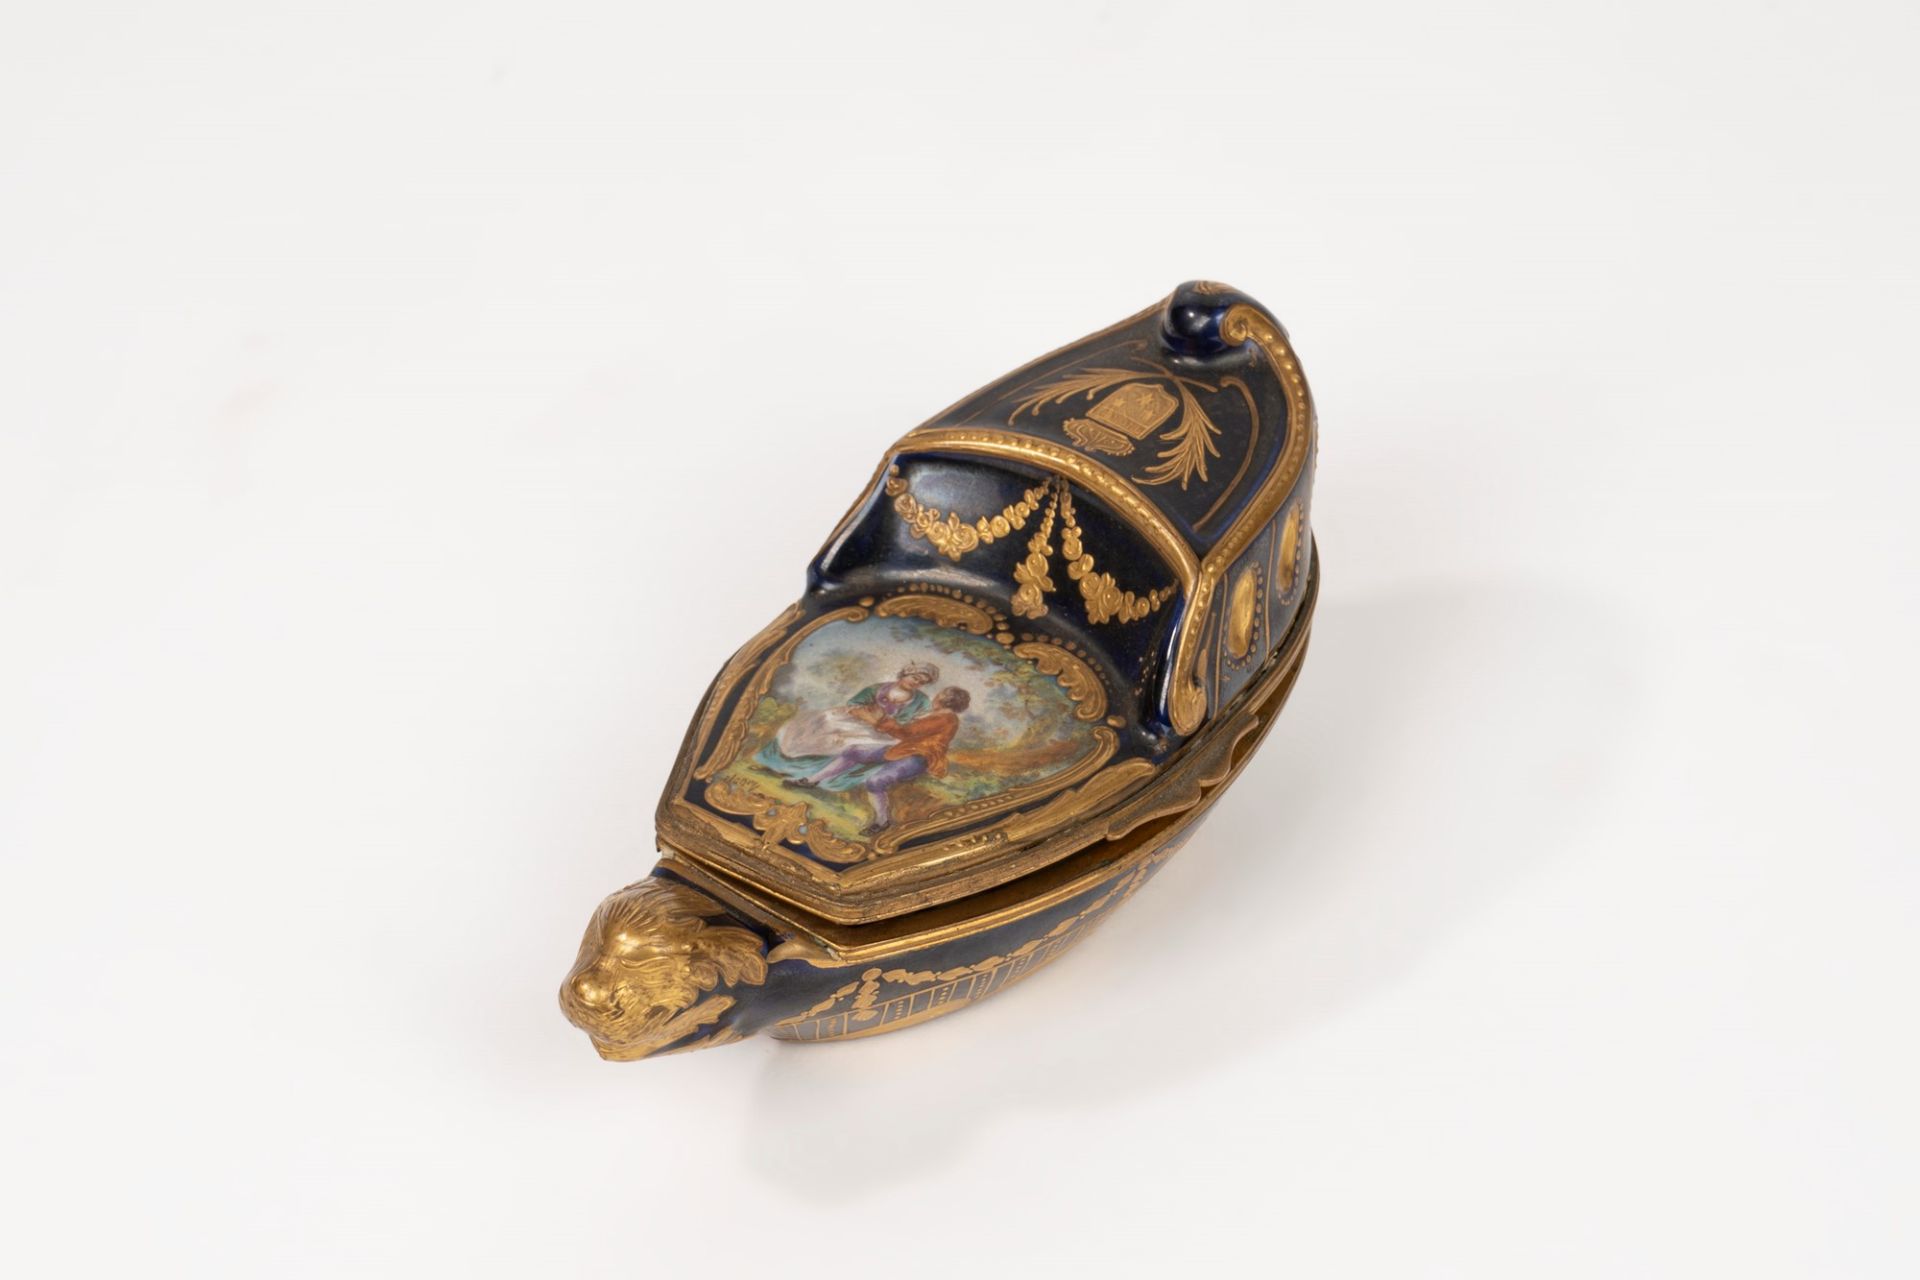 Snuffbox in polychrome porcelain and gilded bronze finishes, Sevres manufacture, late 19th century